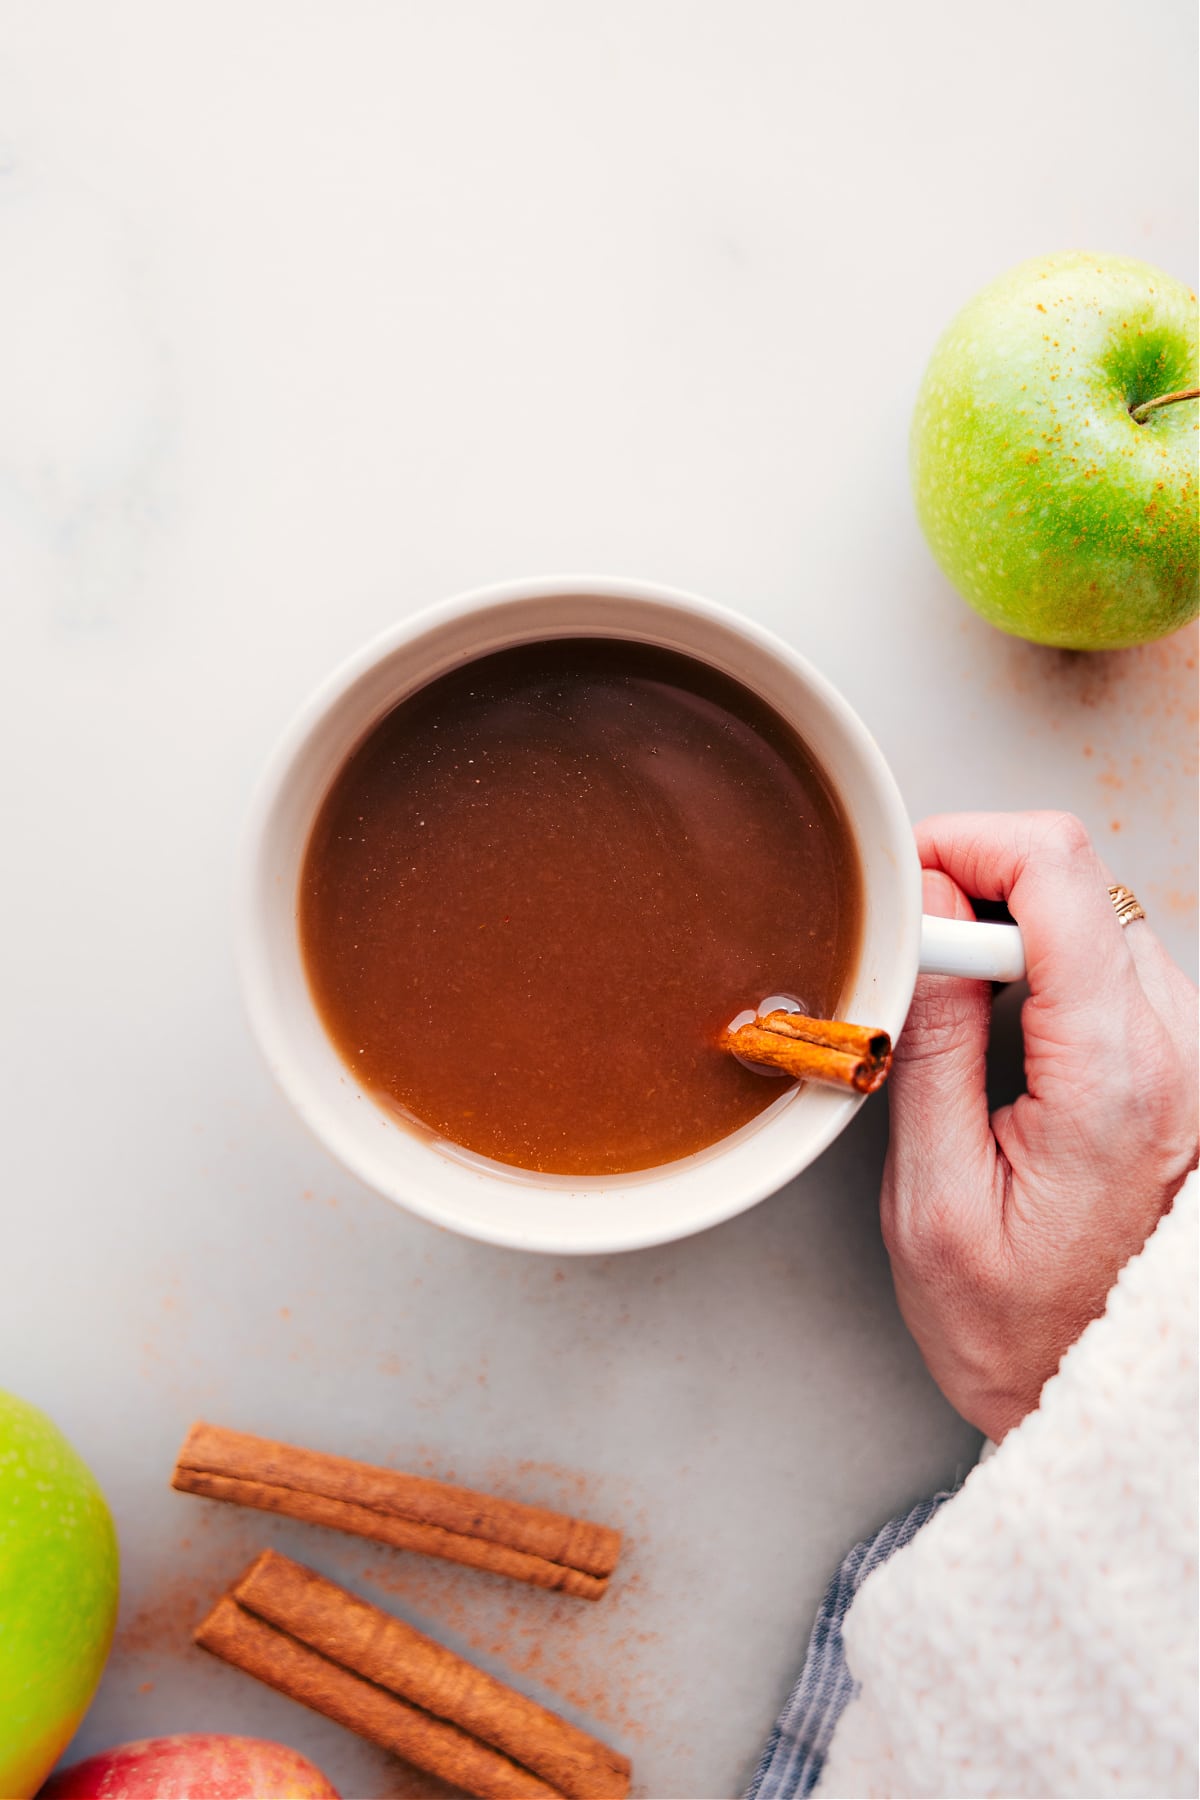 Hand holding a warm cup of apple cider with steam rising.